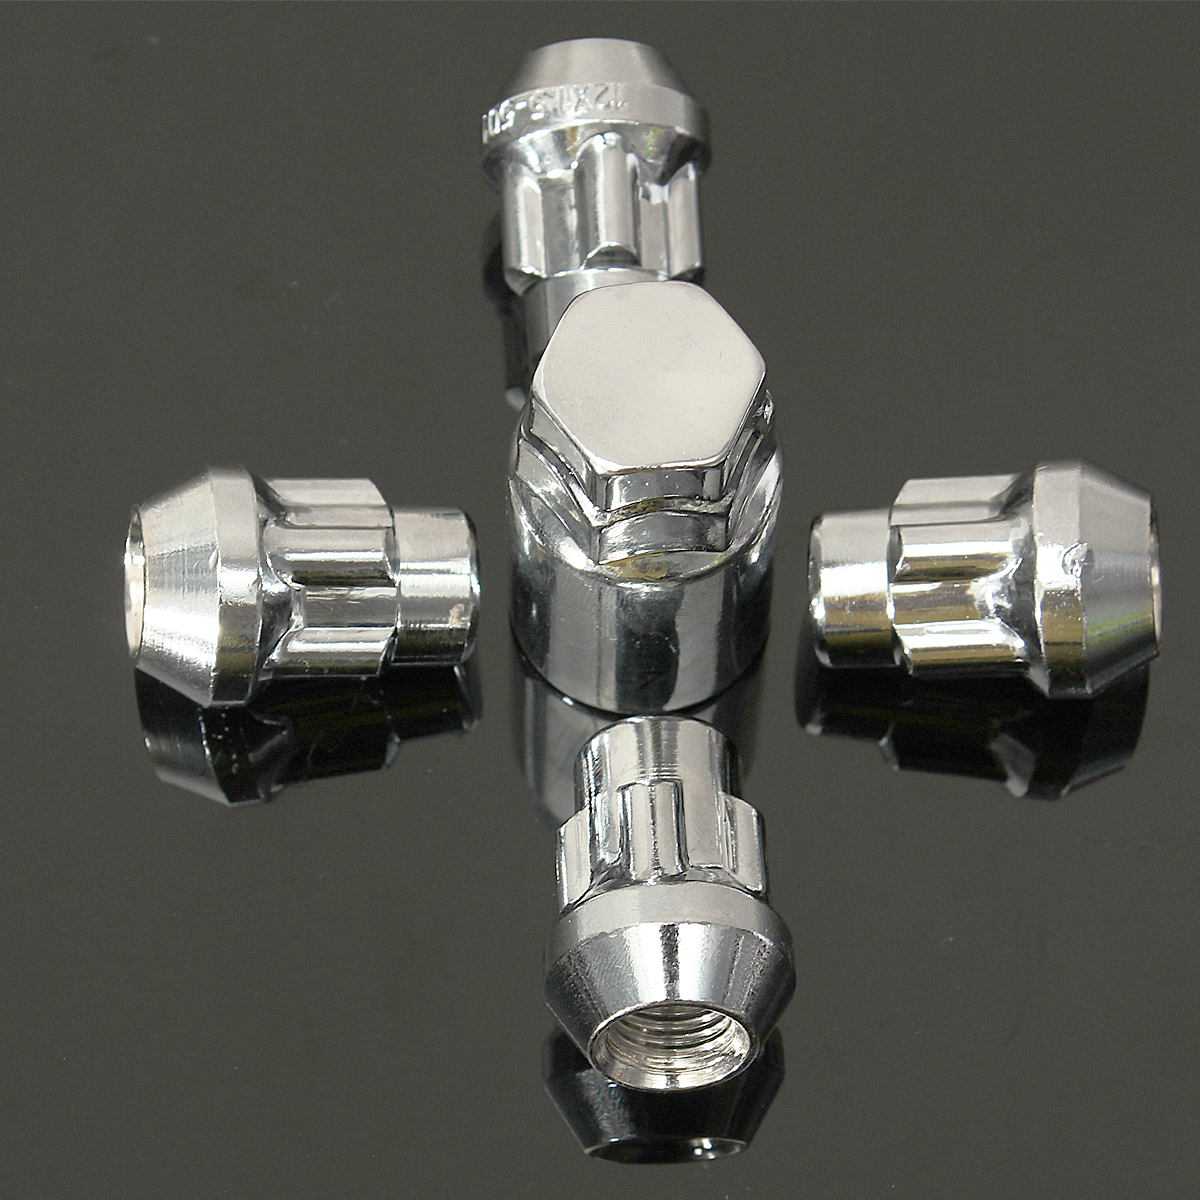 1-Set-Lock-Alloy-Wheel-Anti-Theft-Nuts-Bolts-With-Key-60-Degree-Taped-12x15mm-1007887